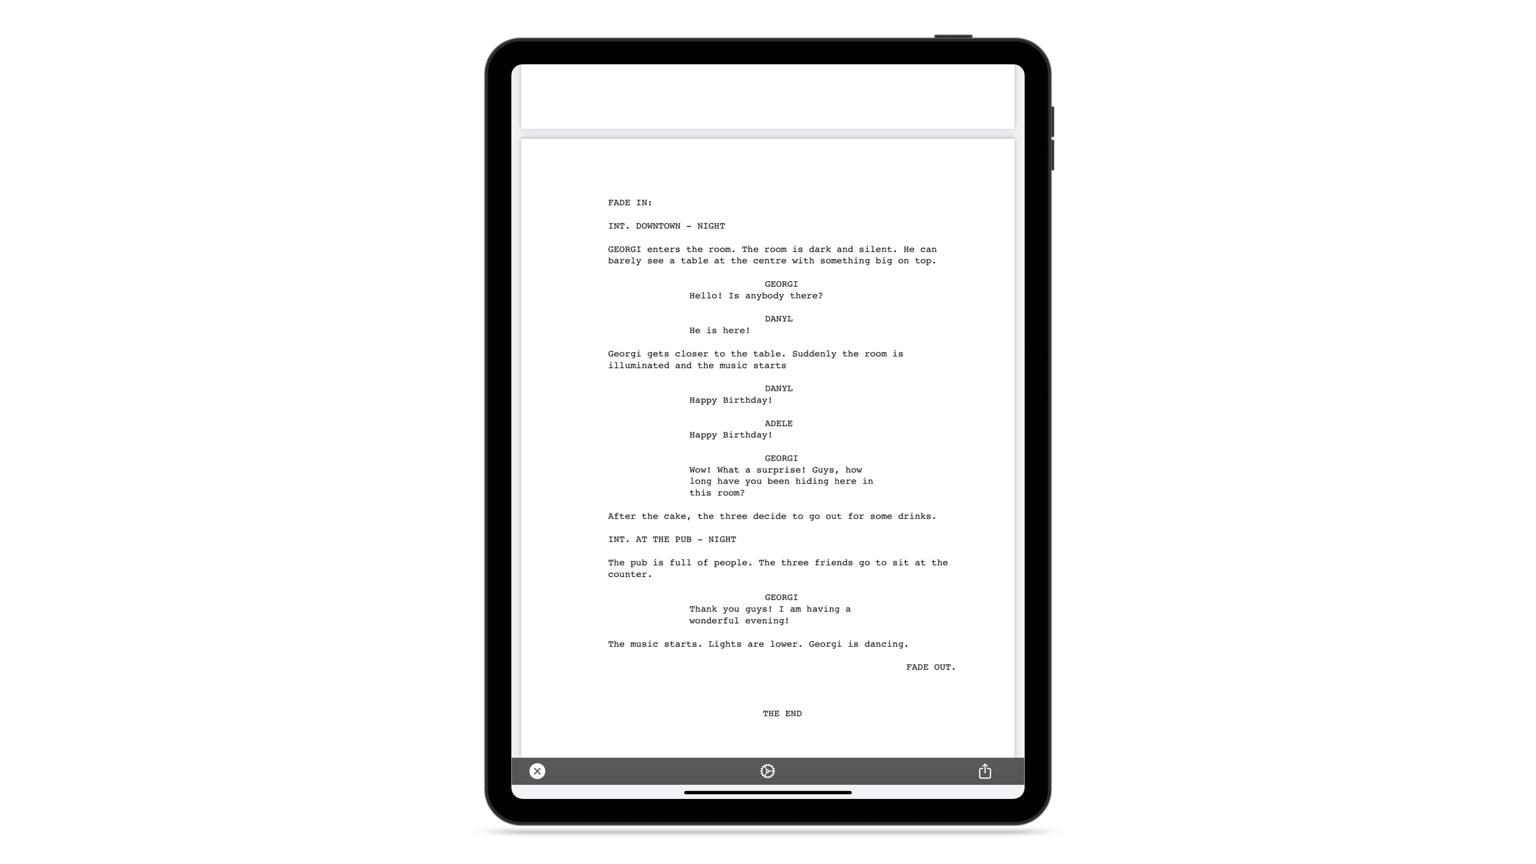 Example of a screenplay formatted according to the american standard using TwelvePoint for iOS (iPad, iPhone, Apple Vision Pro)